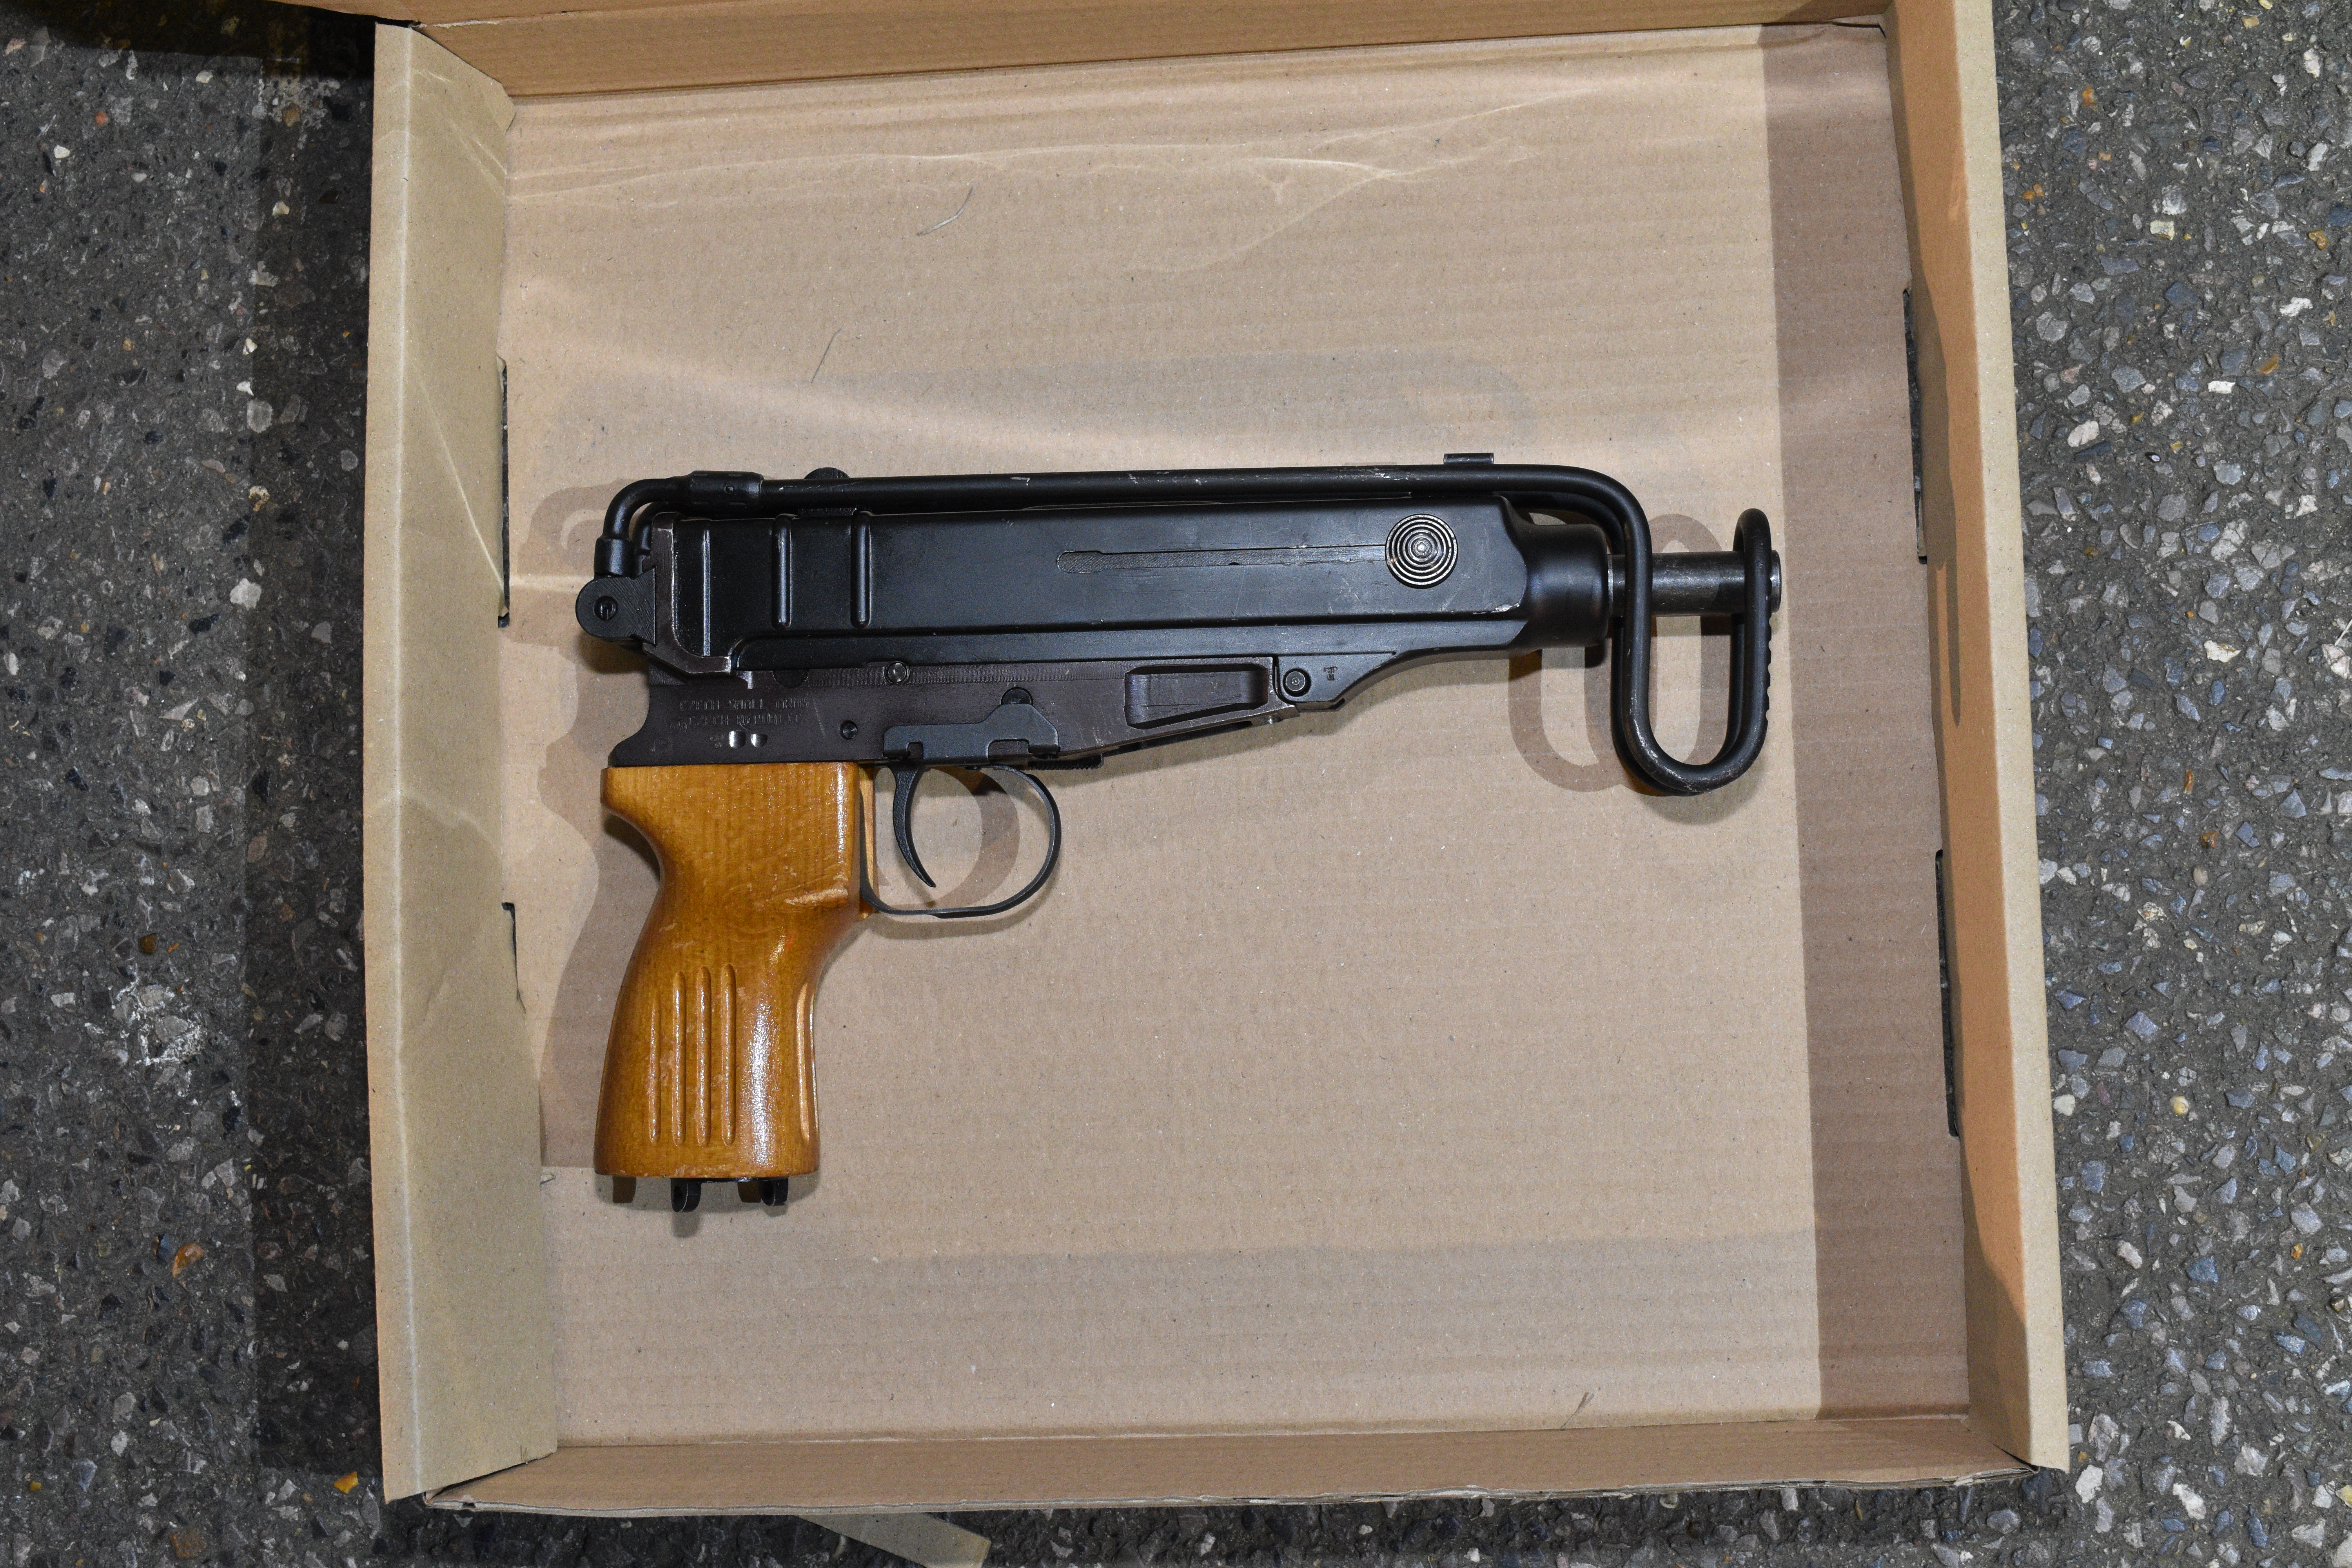 One of the Skorpion submachine guns found in David Longhor's possession